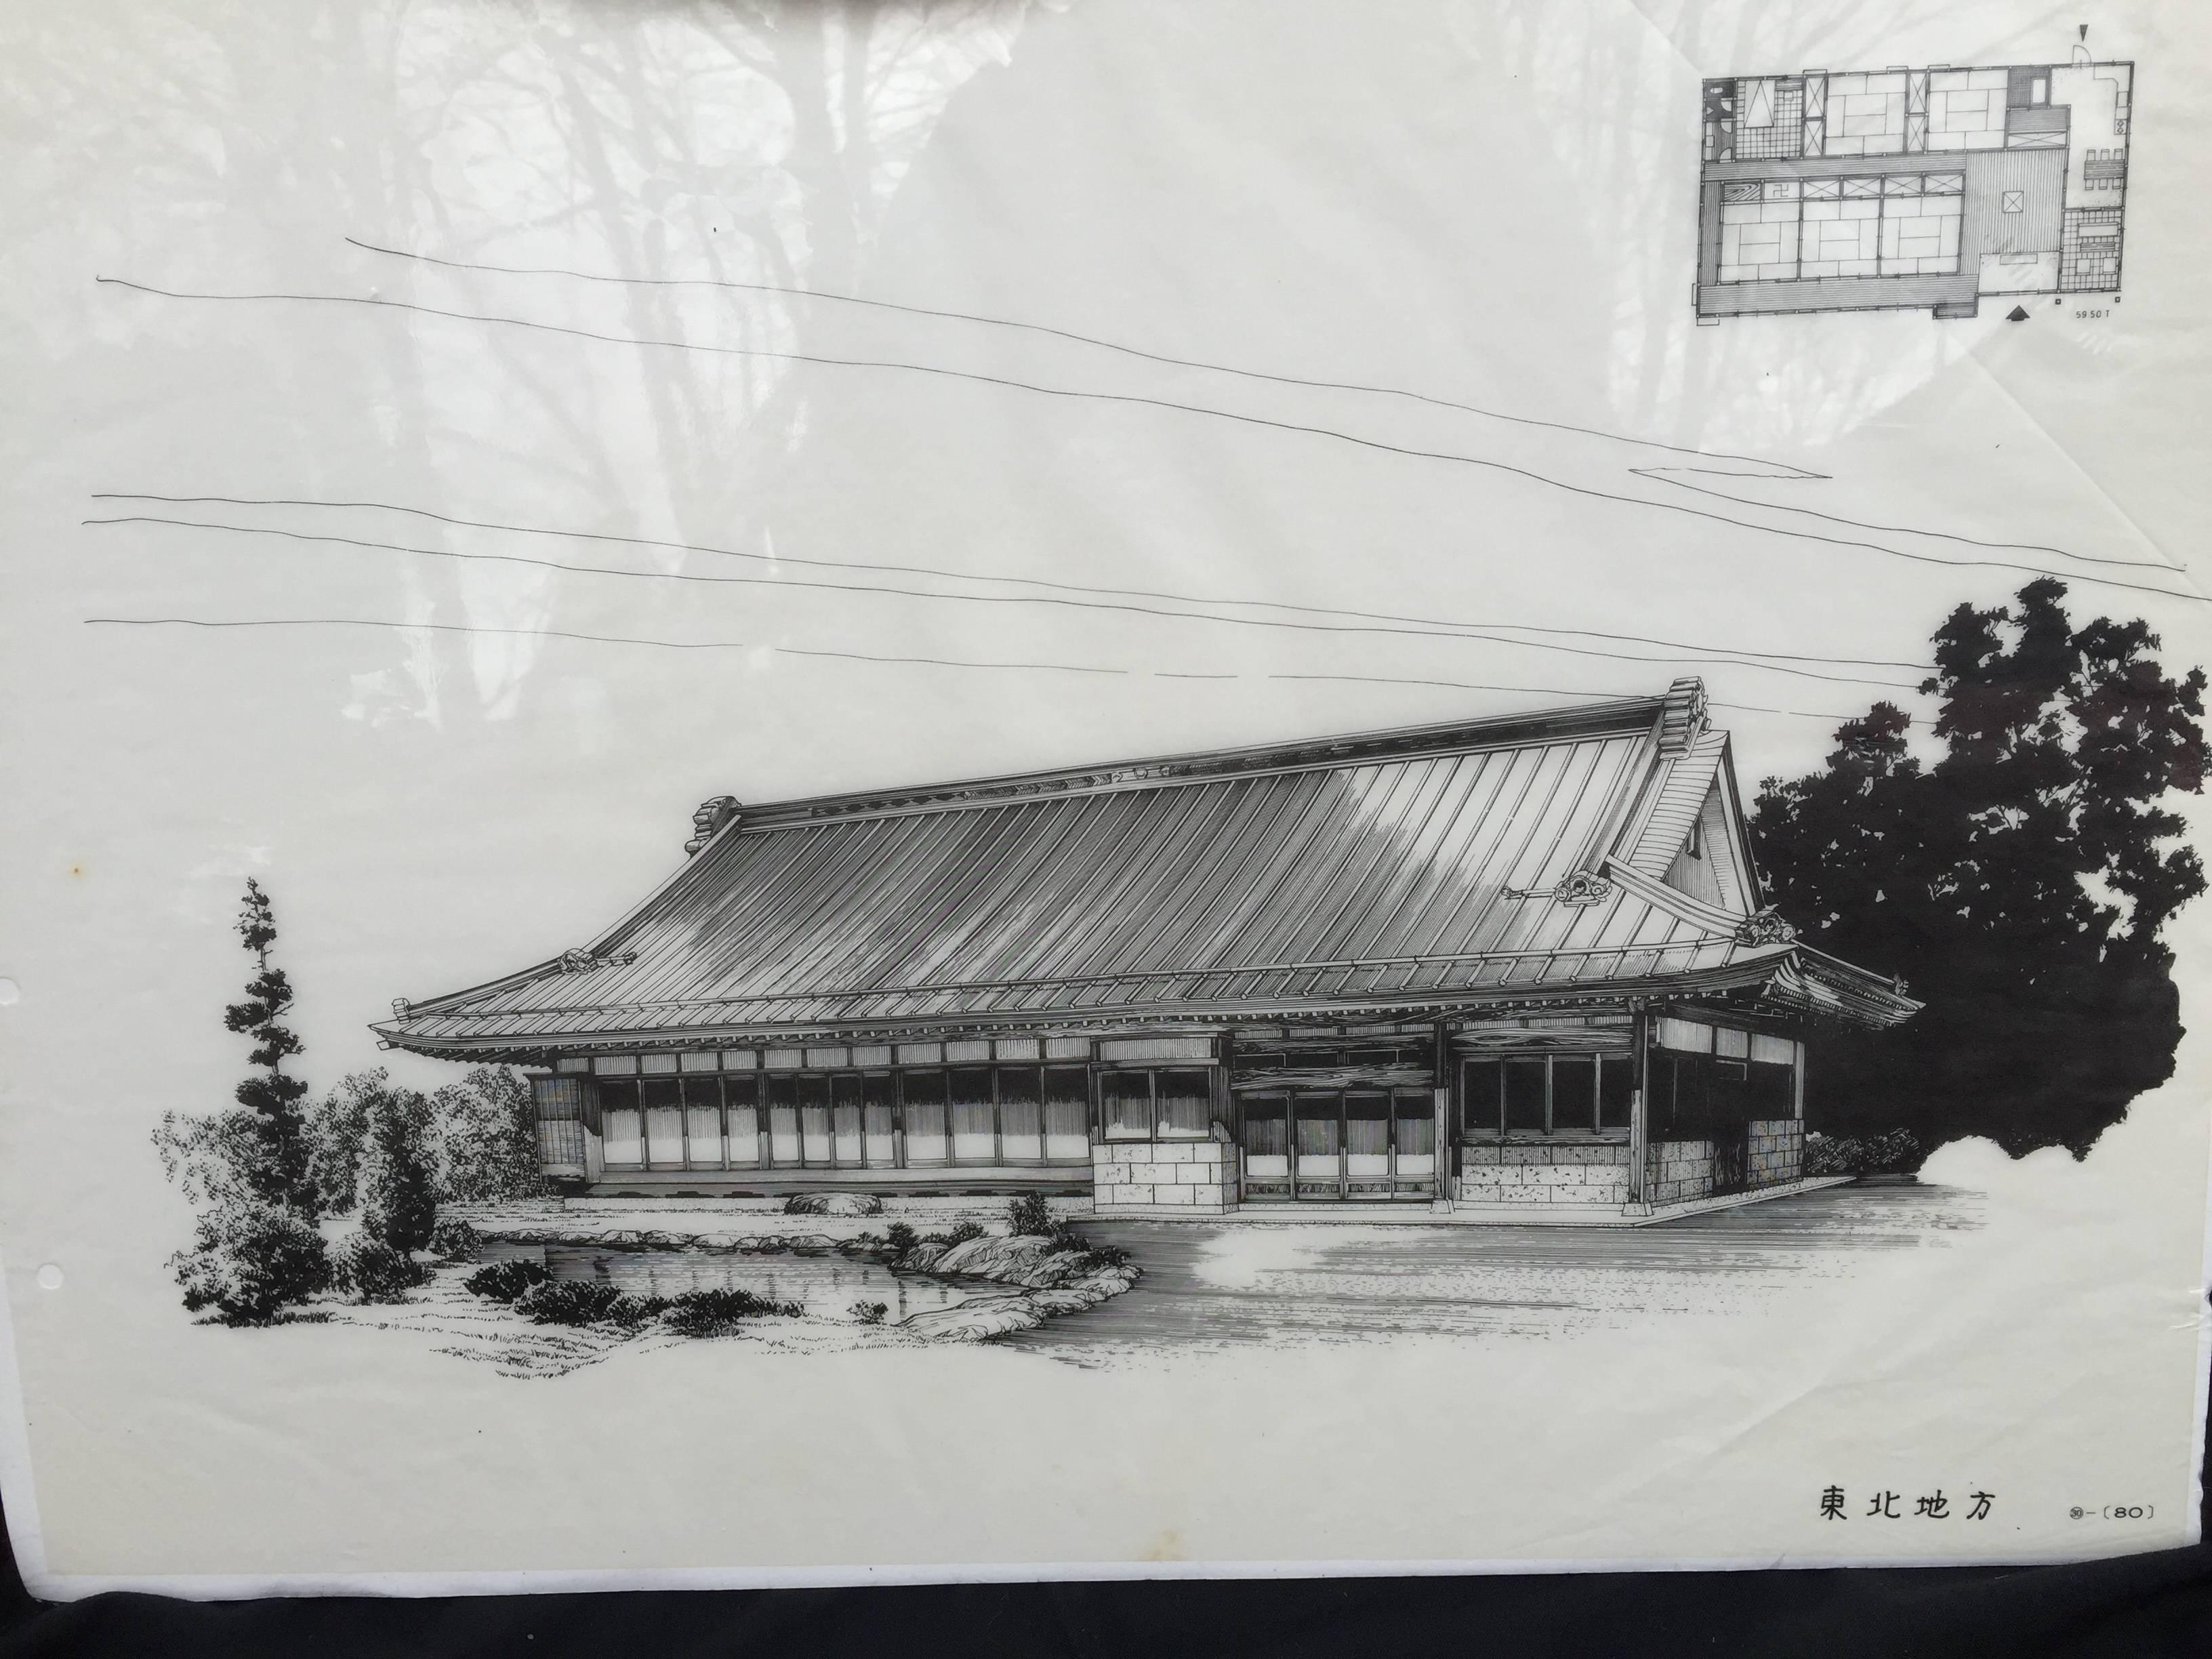 Japan Fine Building Prints over Size Book, 100+ Prints Ready to Frame 2